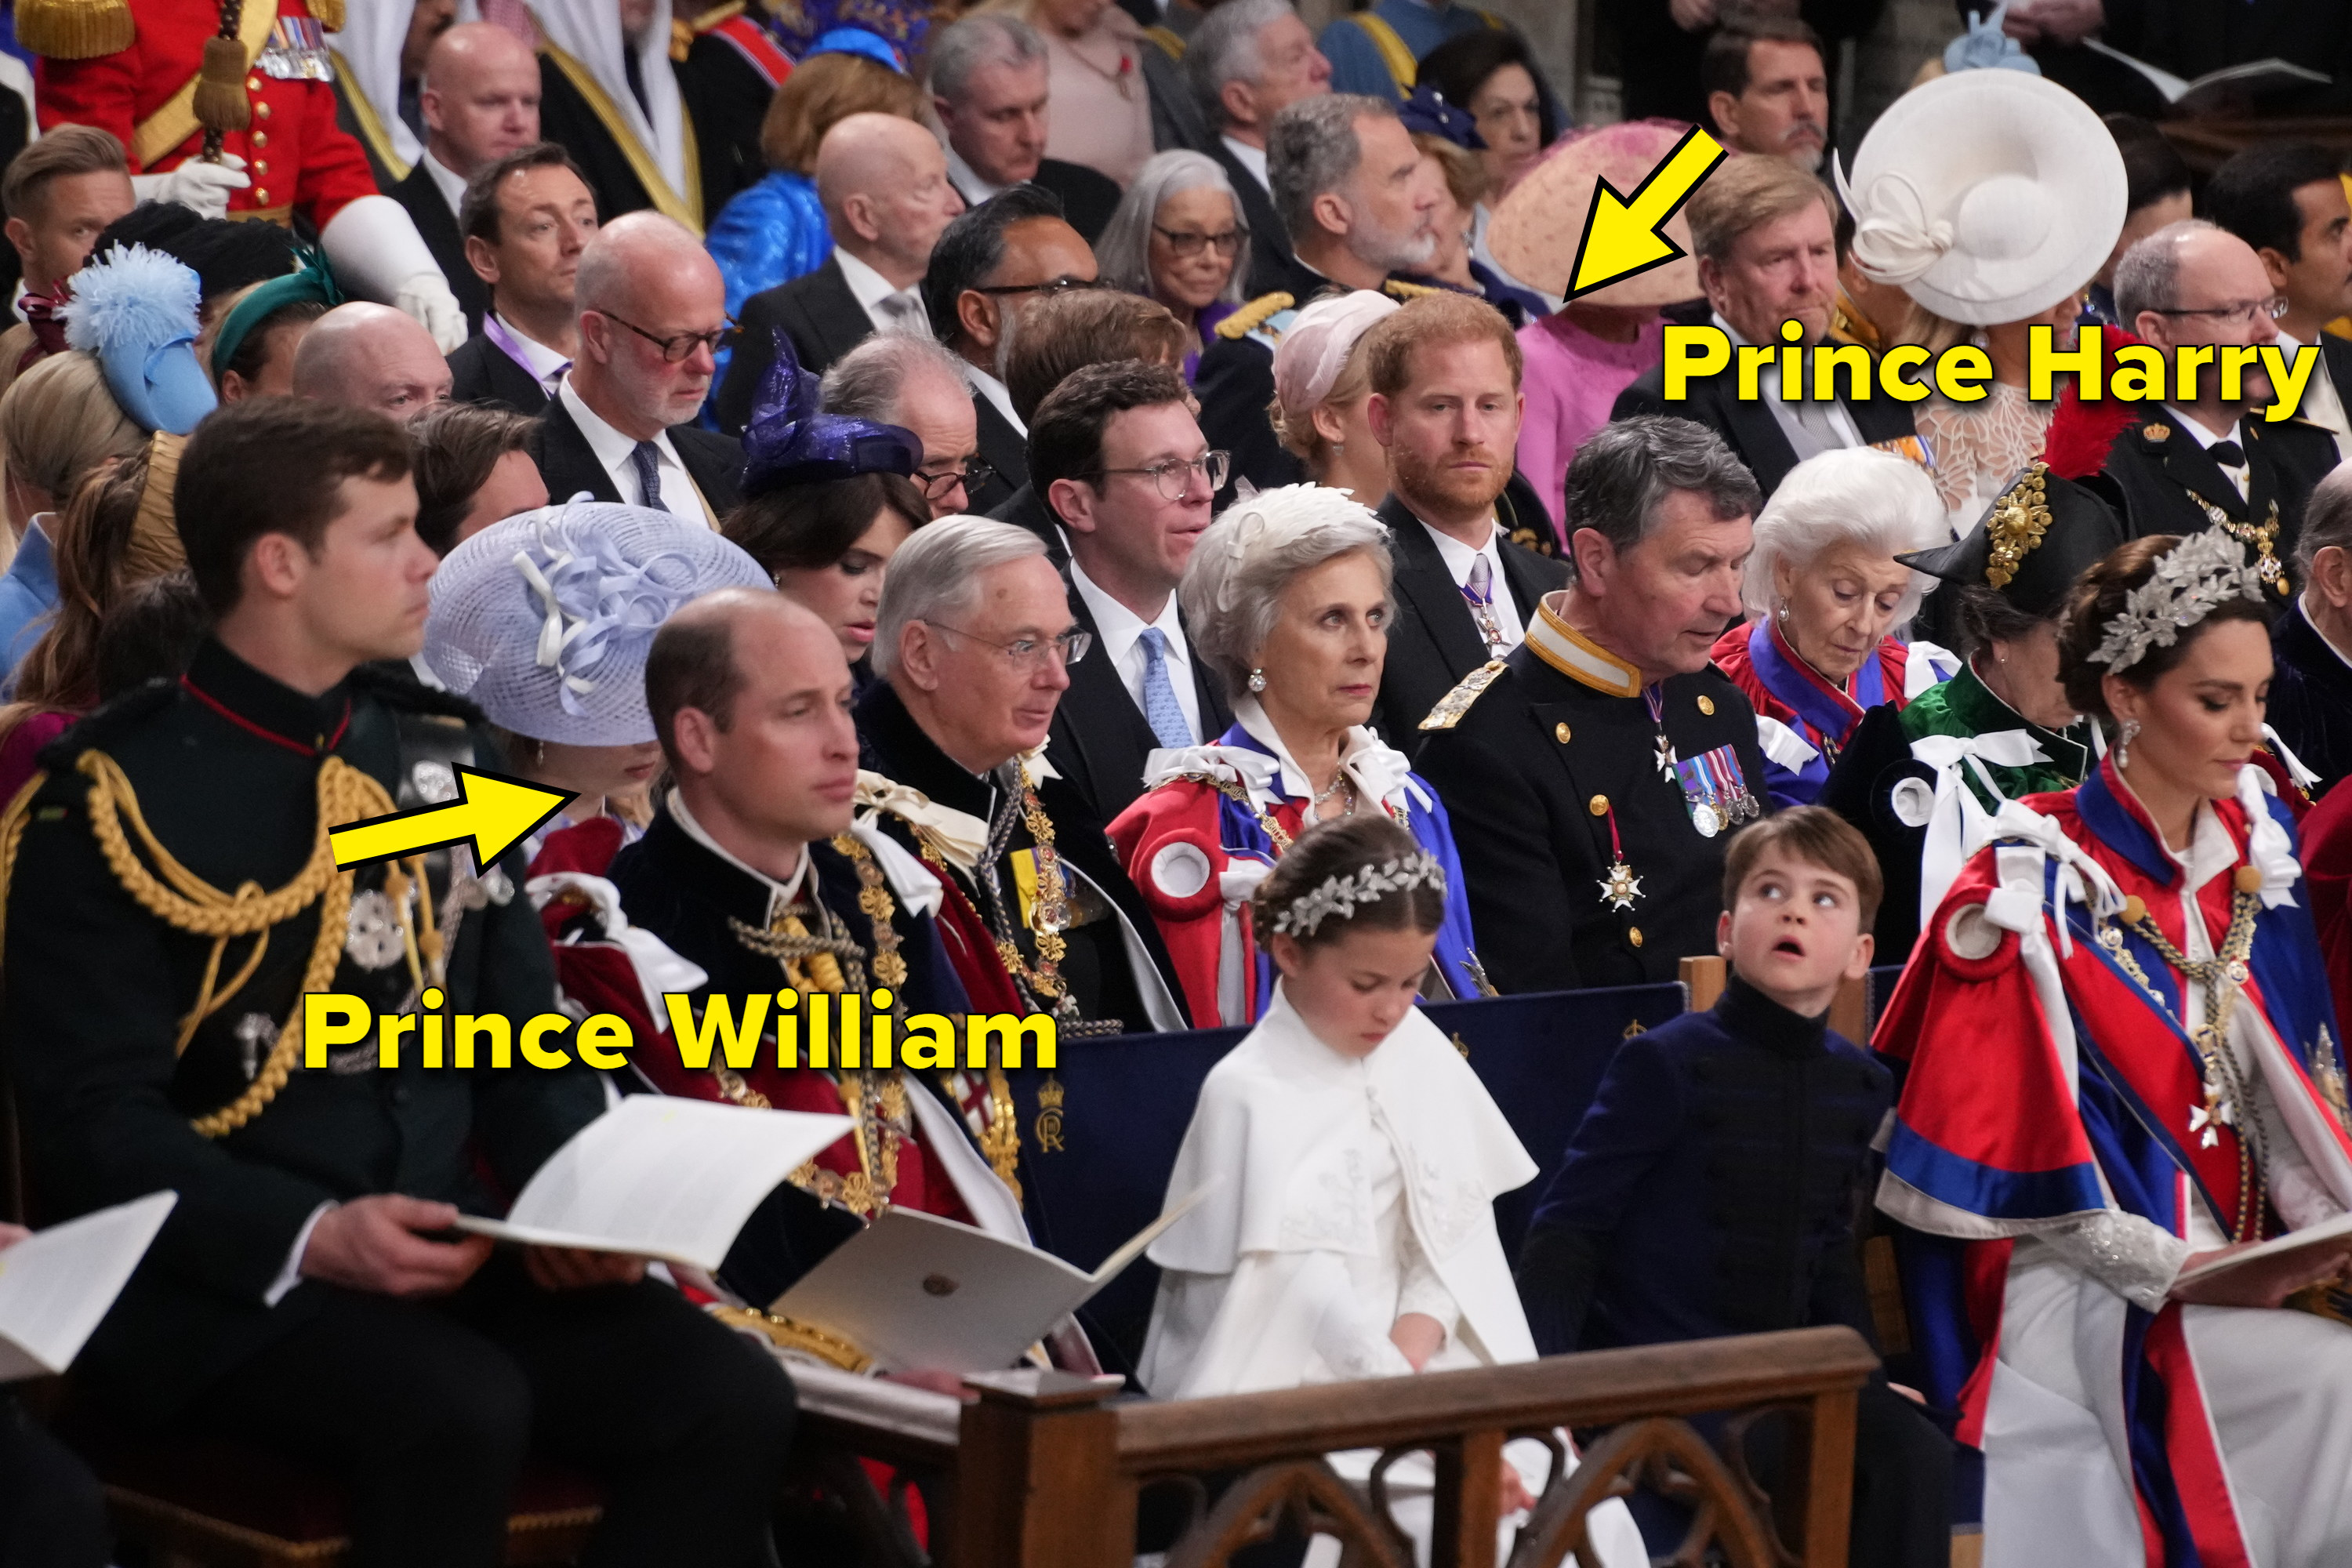 arrow pointing to prince harry in a row behind prince william